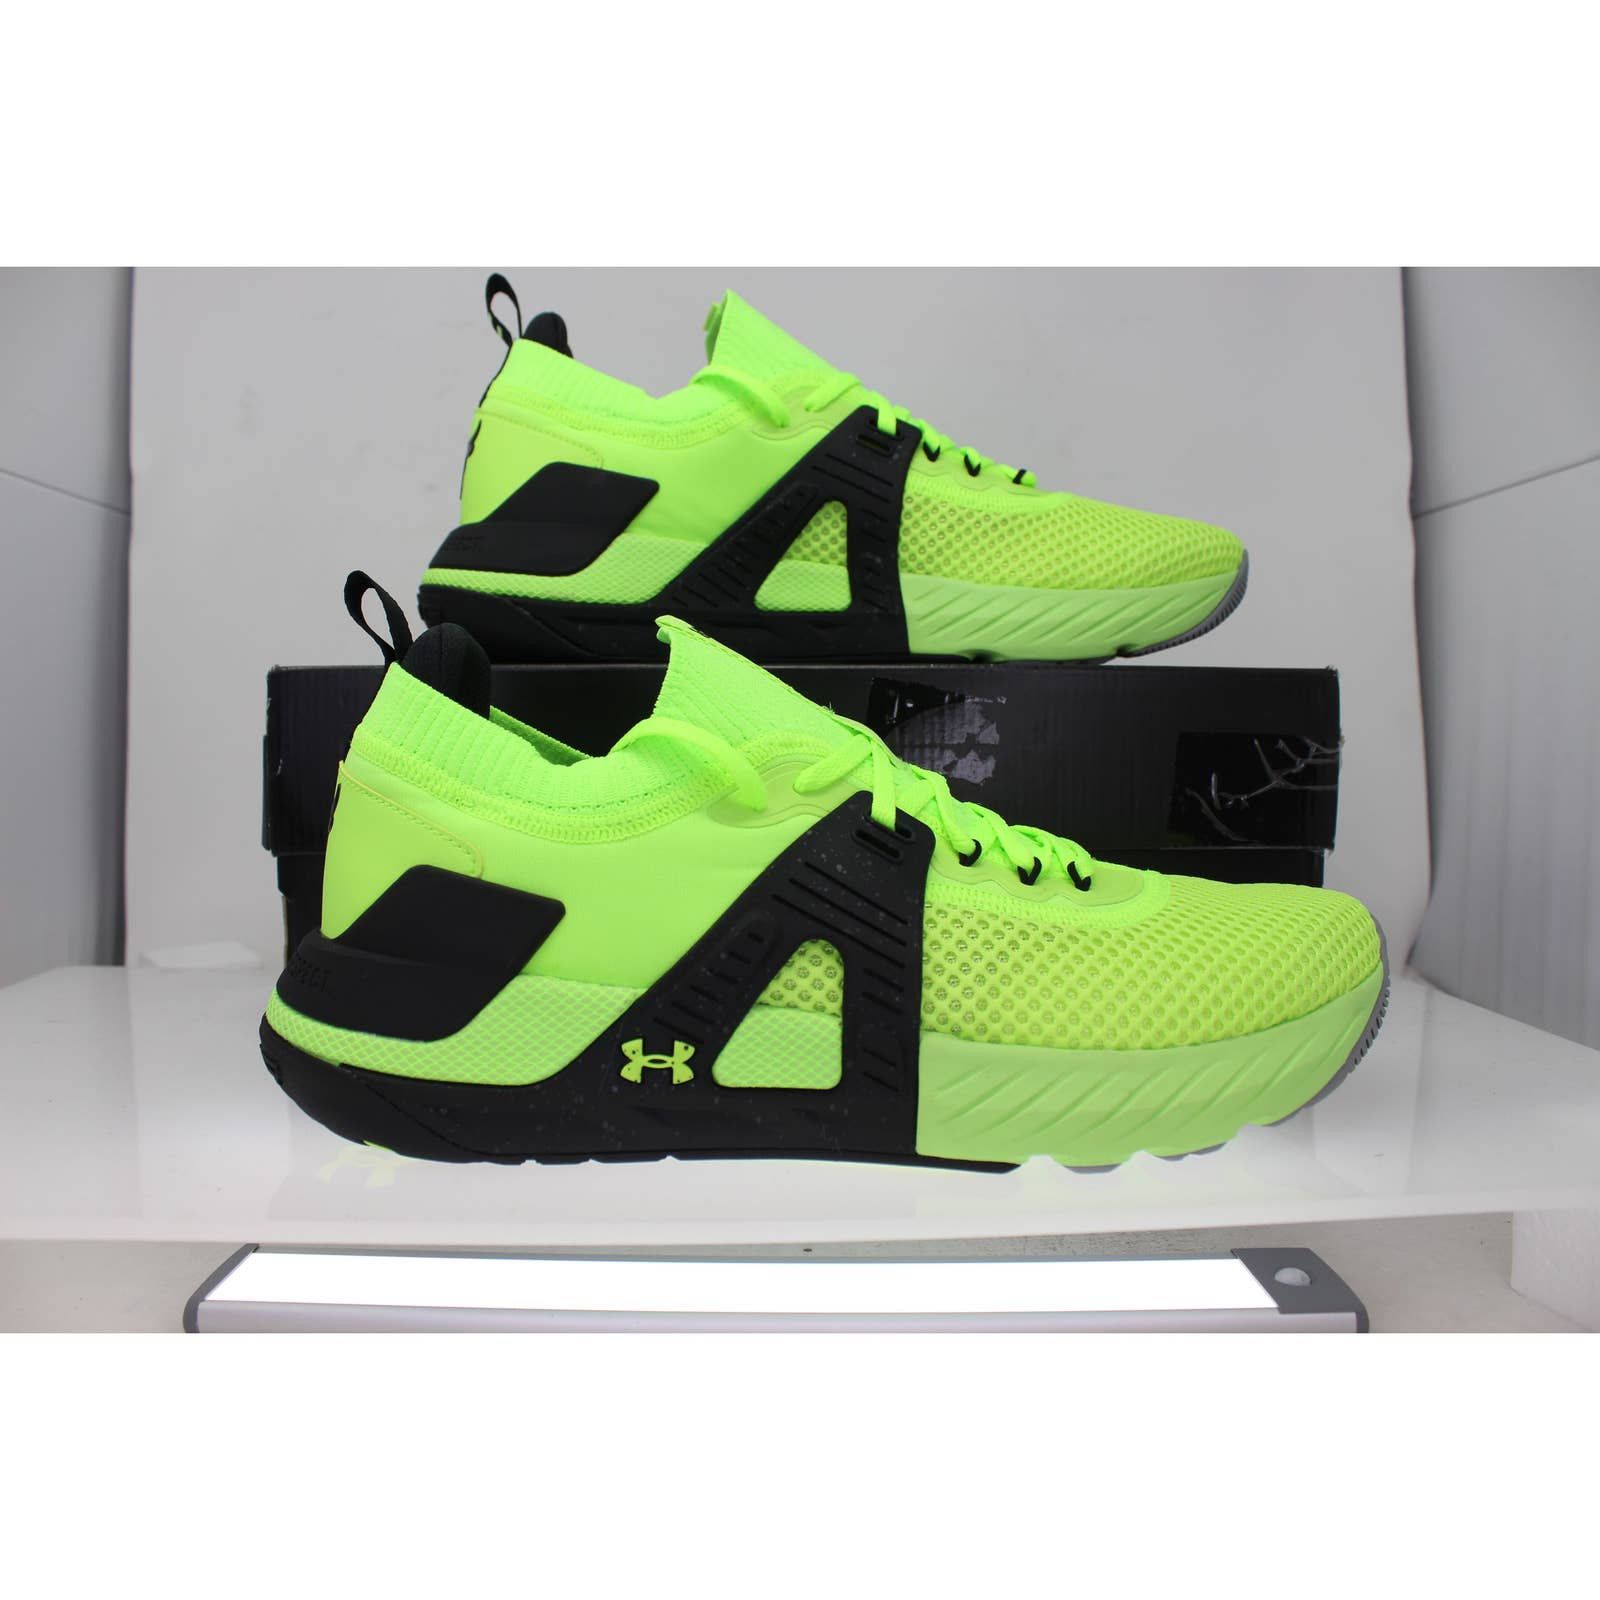 Under Armour Project Rock 4 Green/Black 3023695-303